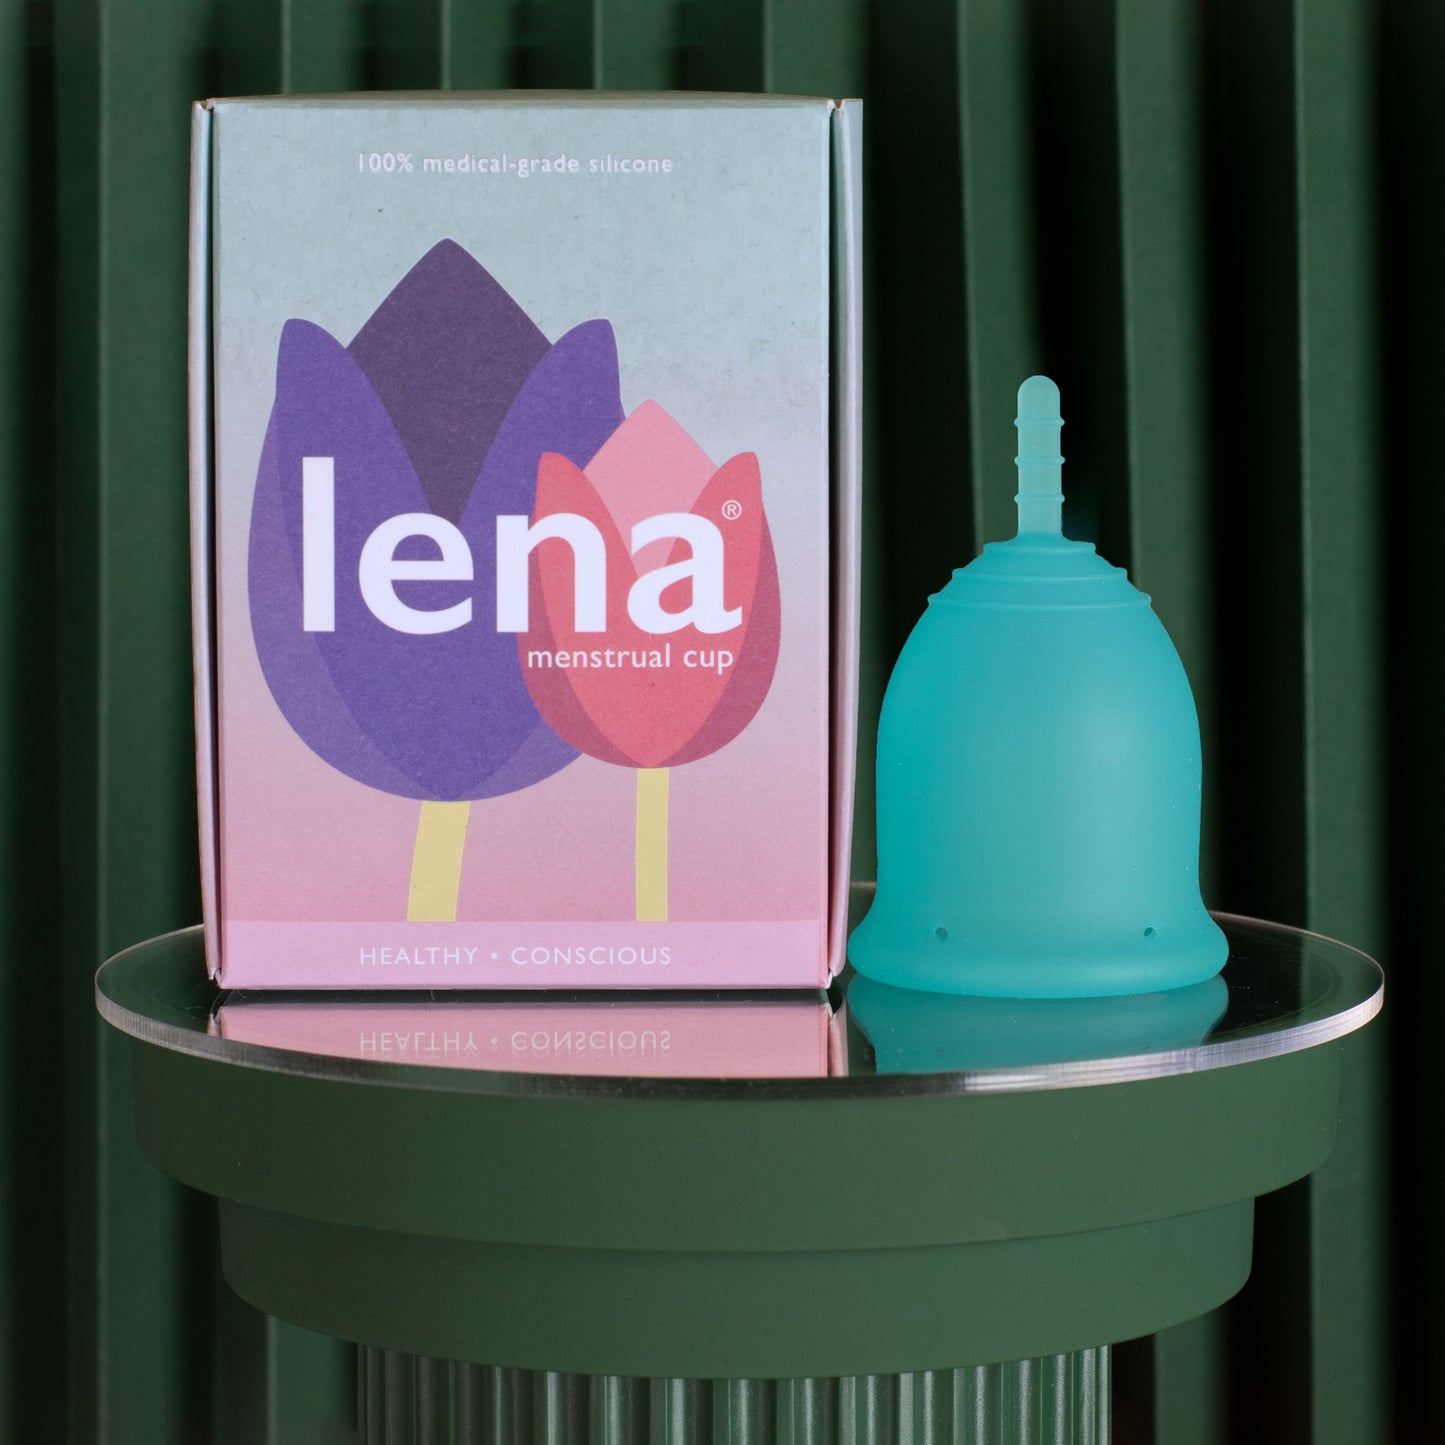 Lena menstrual cup with packaging in turquoise size large